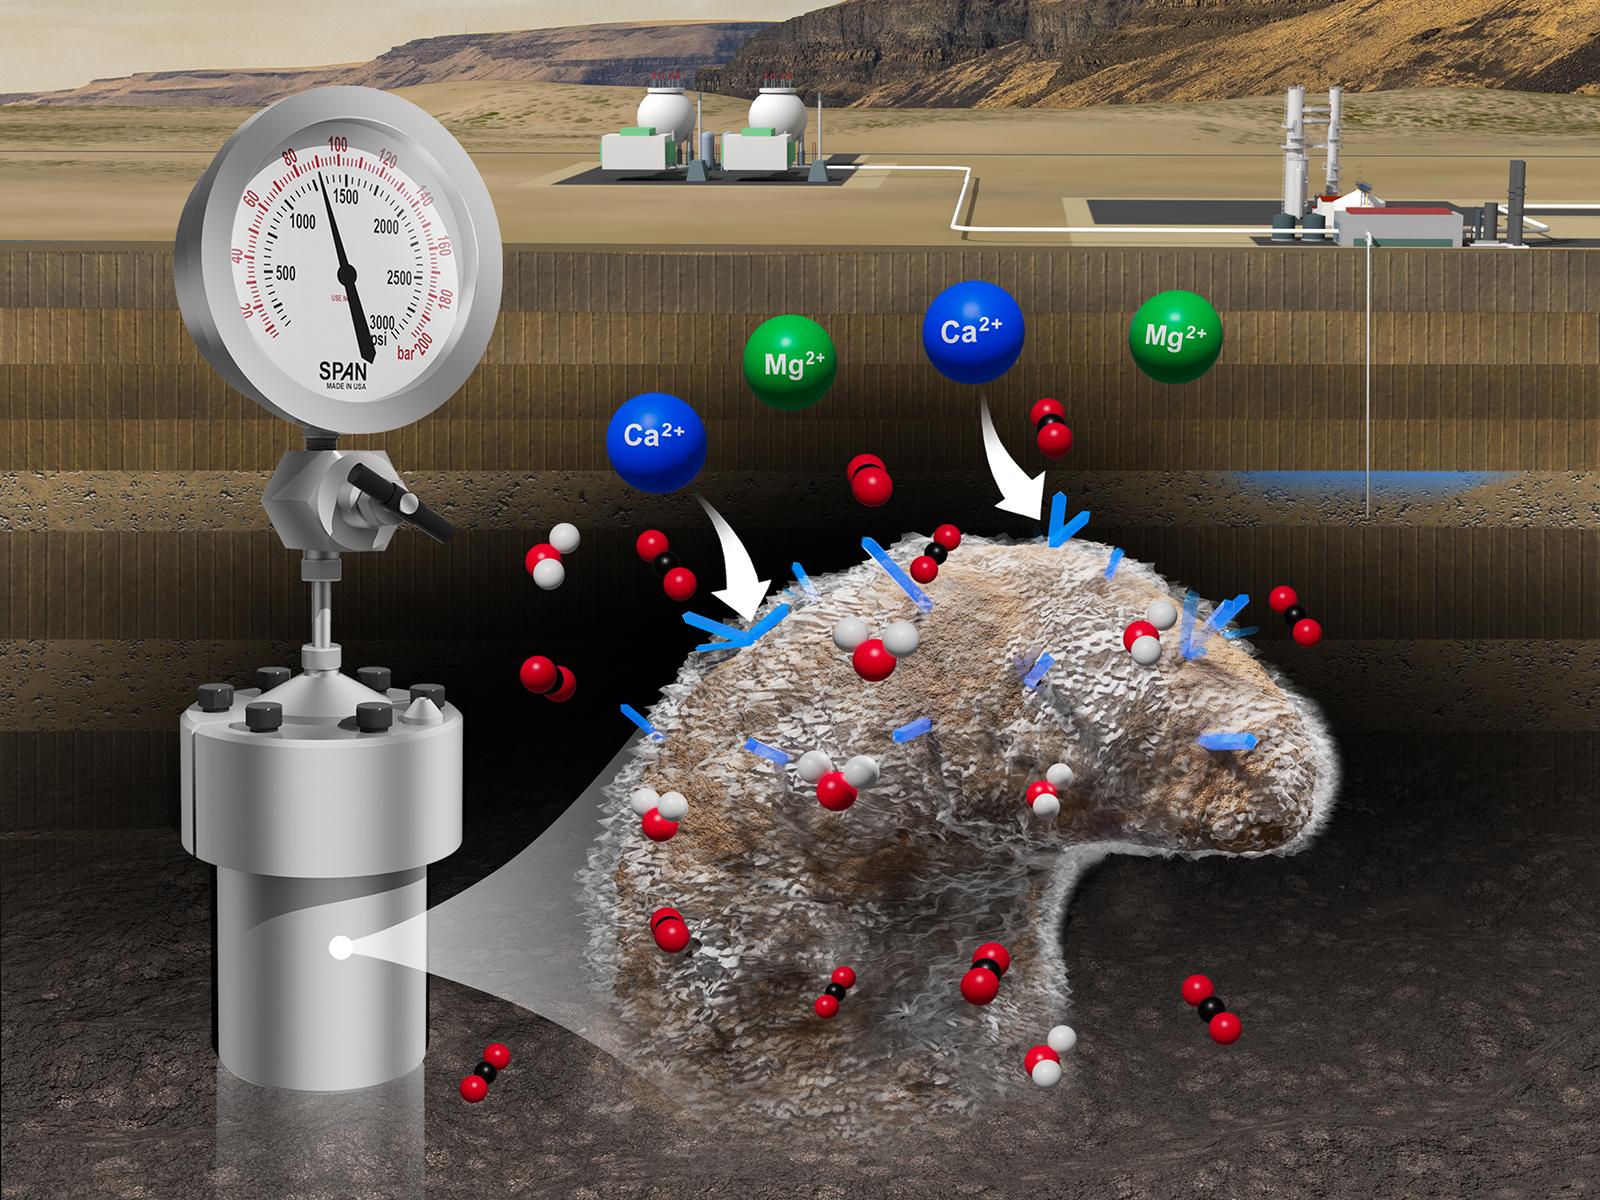 Visual composite of the nanoscale carbon mineralization process using a reactor at high temperature and pressure. The nanoscale composite is shown up close with magnesium and calcium within the sample. Basalt reservoirs are in the background at a distance.